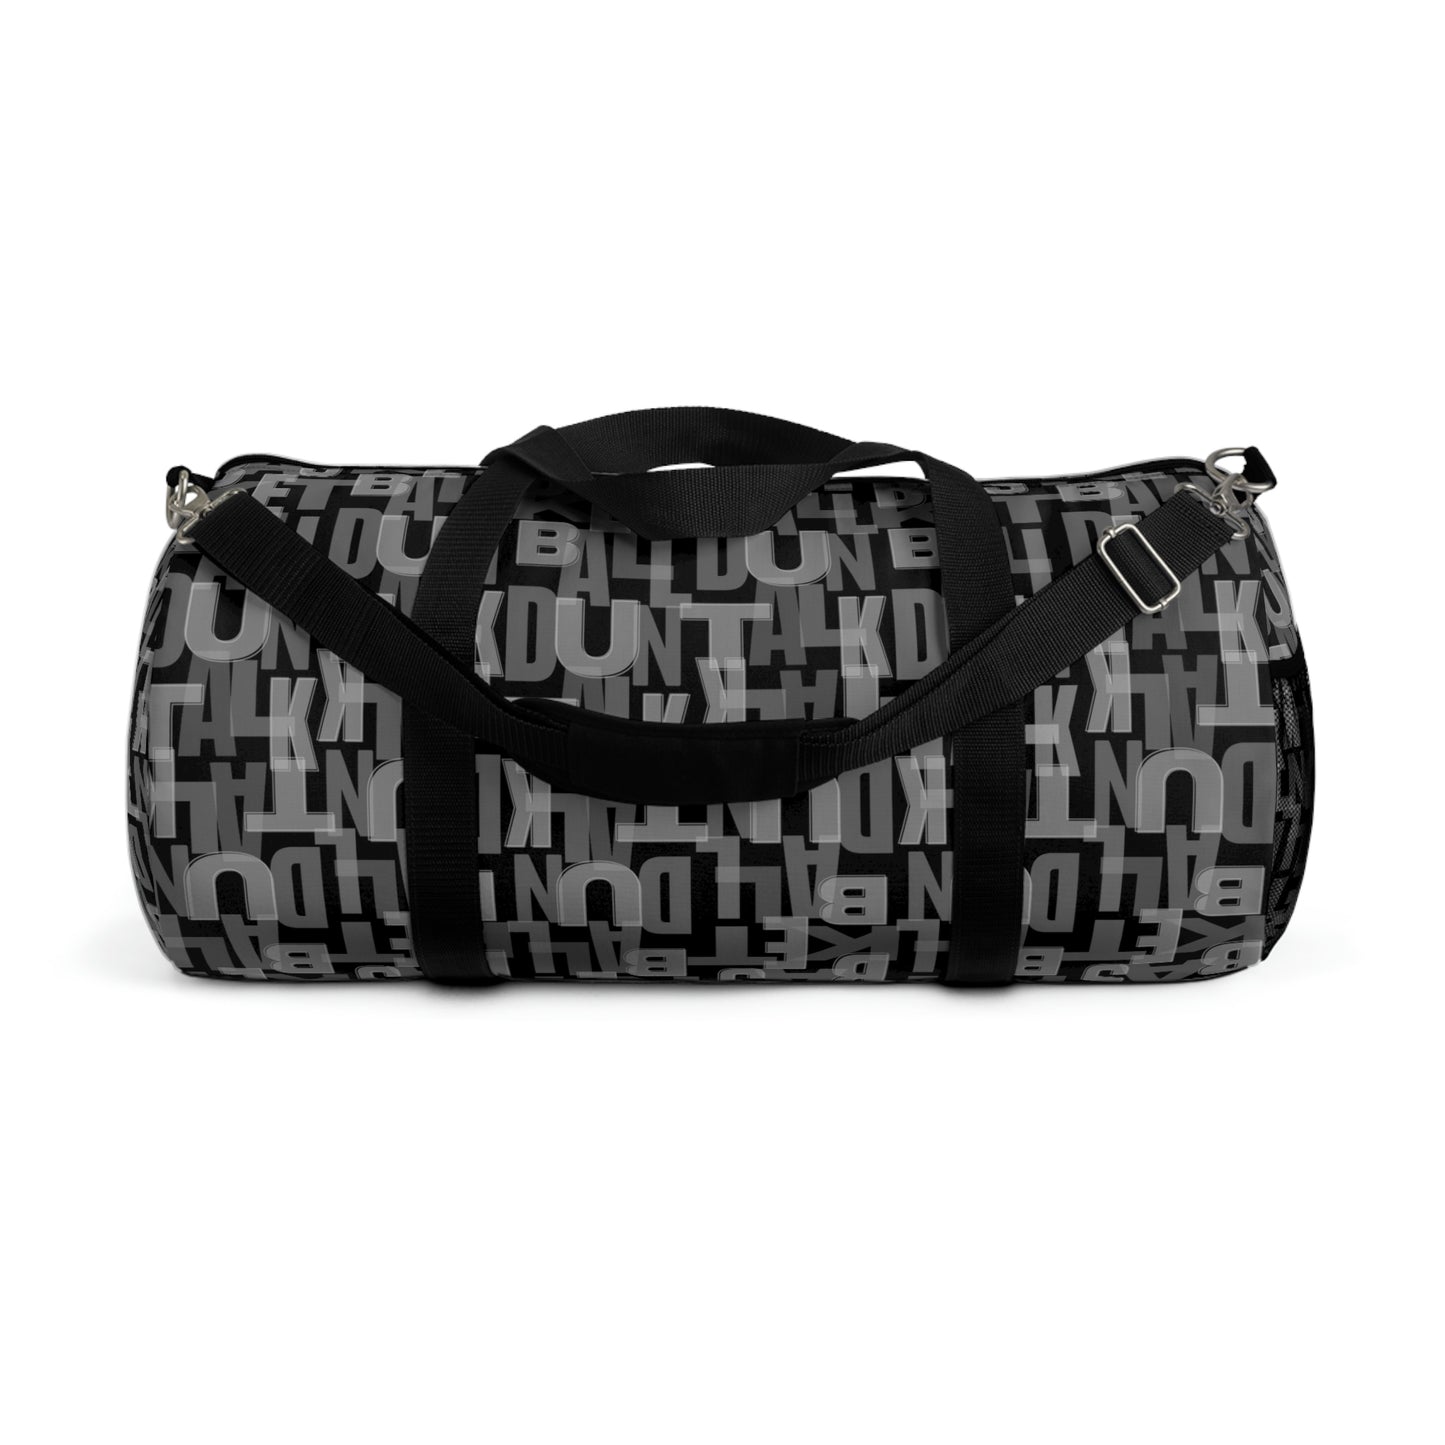 Black duffle bag with "Duntalk" written repeatedly in shades of white on the outside. Two hand straps and an adjustable arm strap. Net pocket on the side.